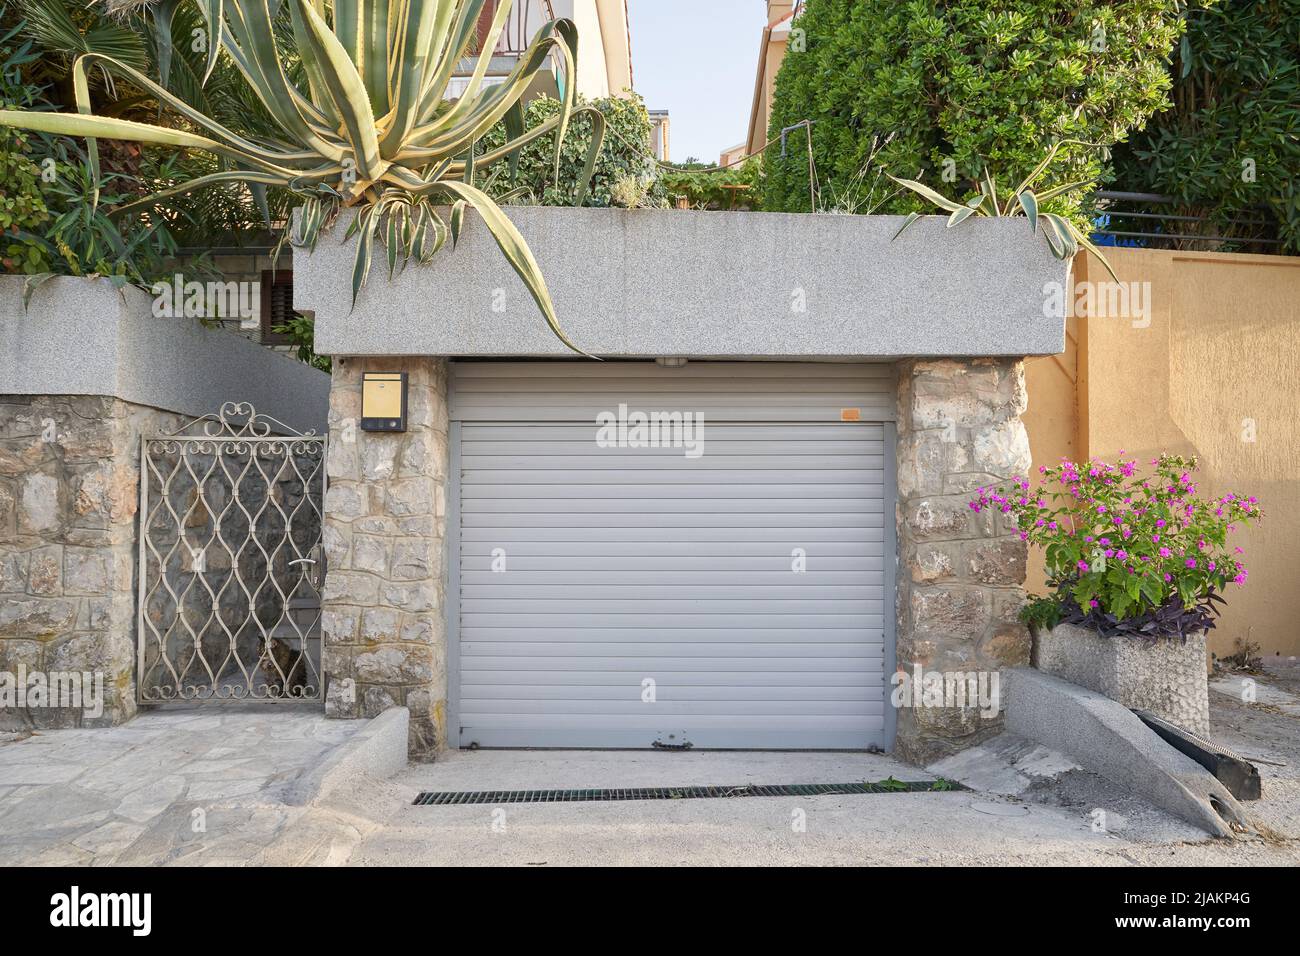 Garage with gray door and greenery on the roof Stock Photo